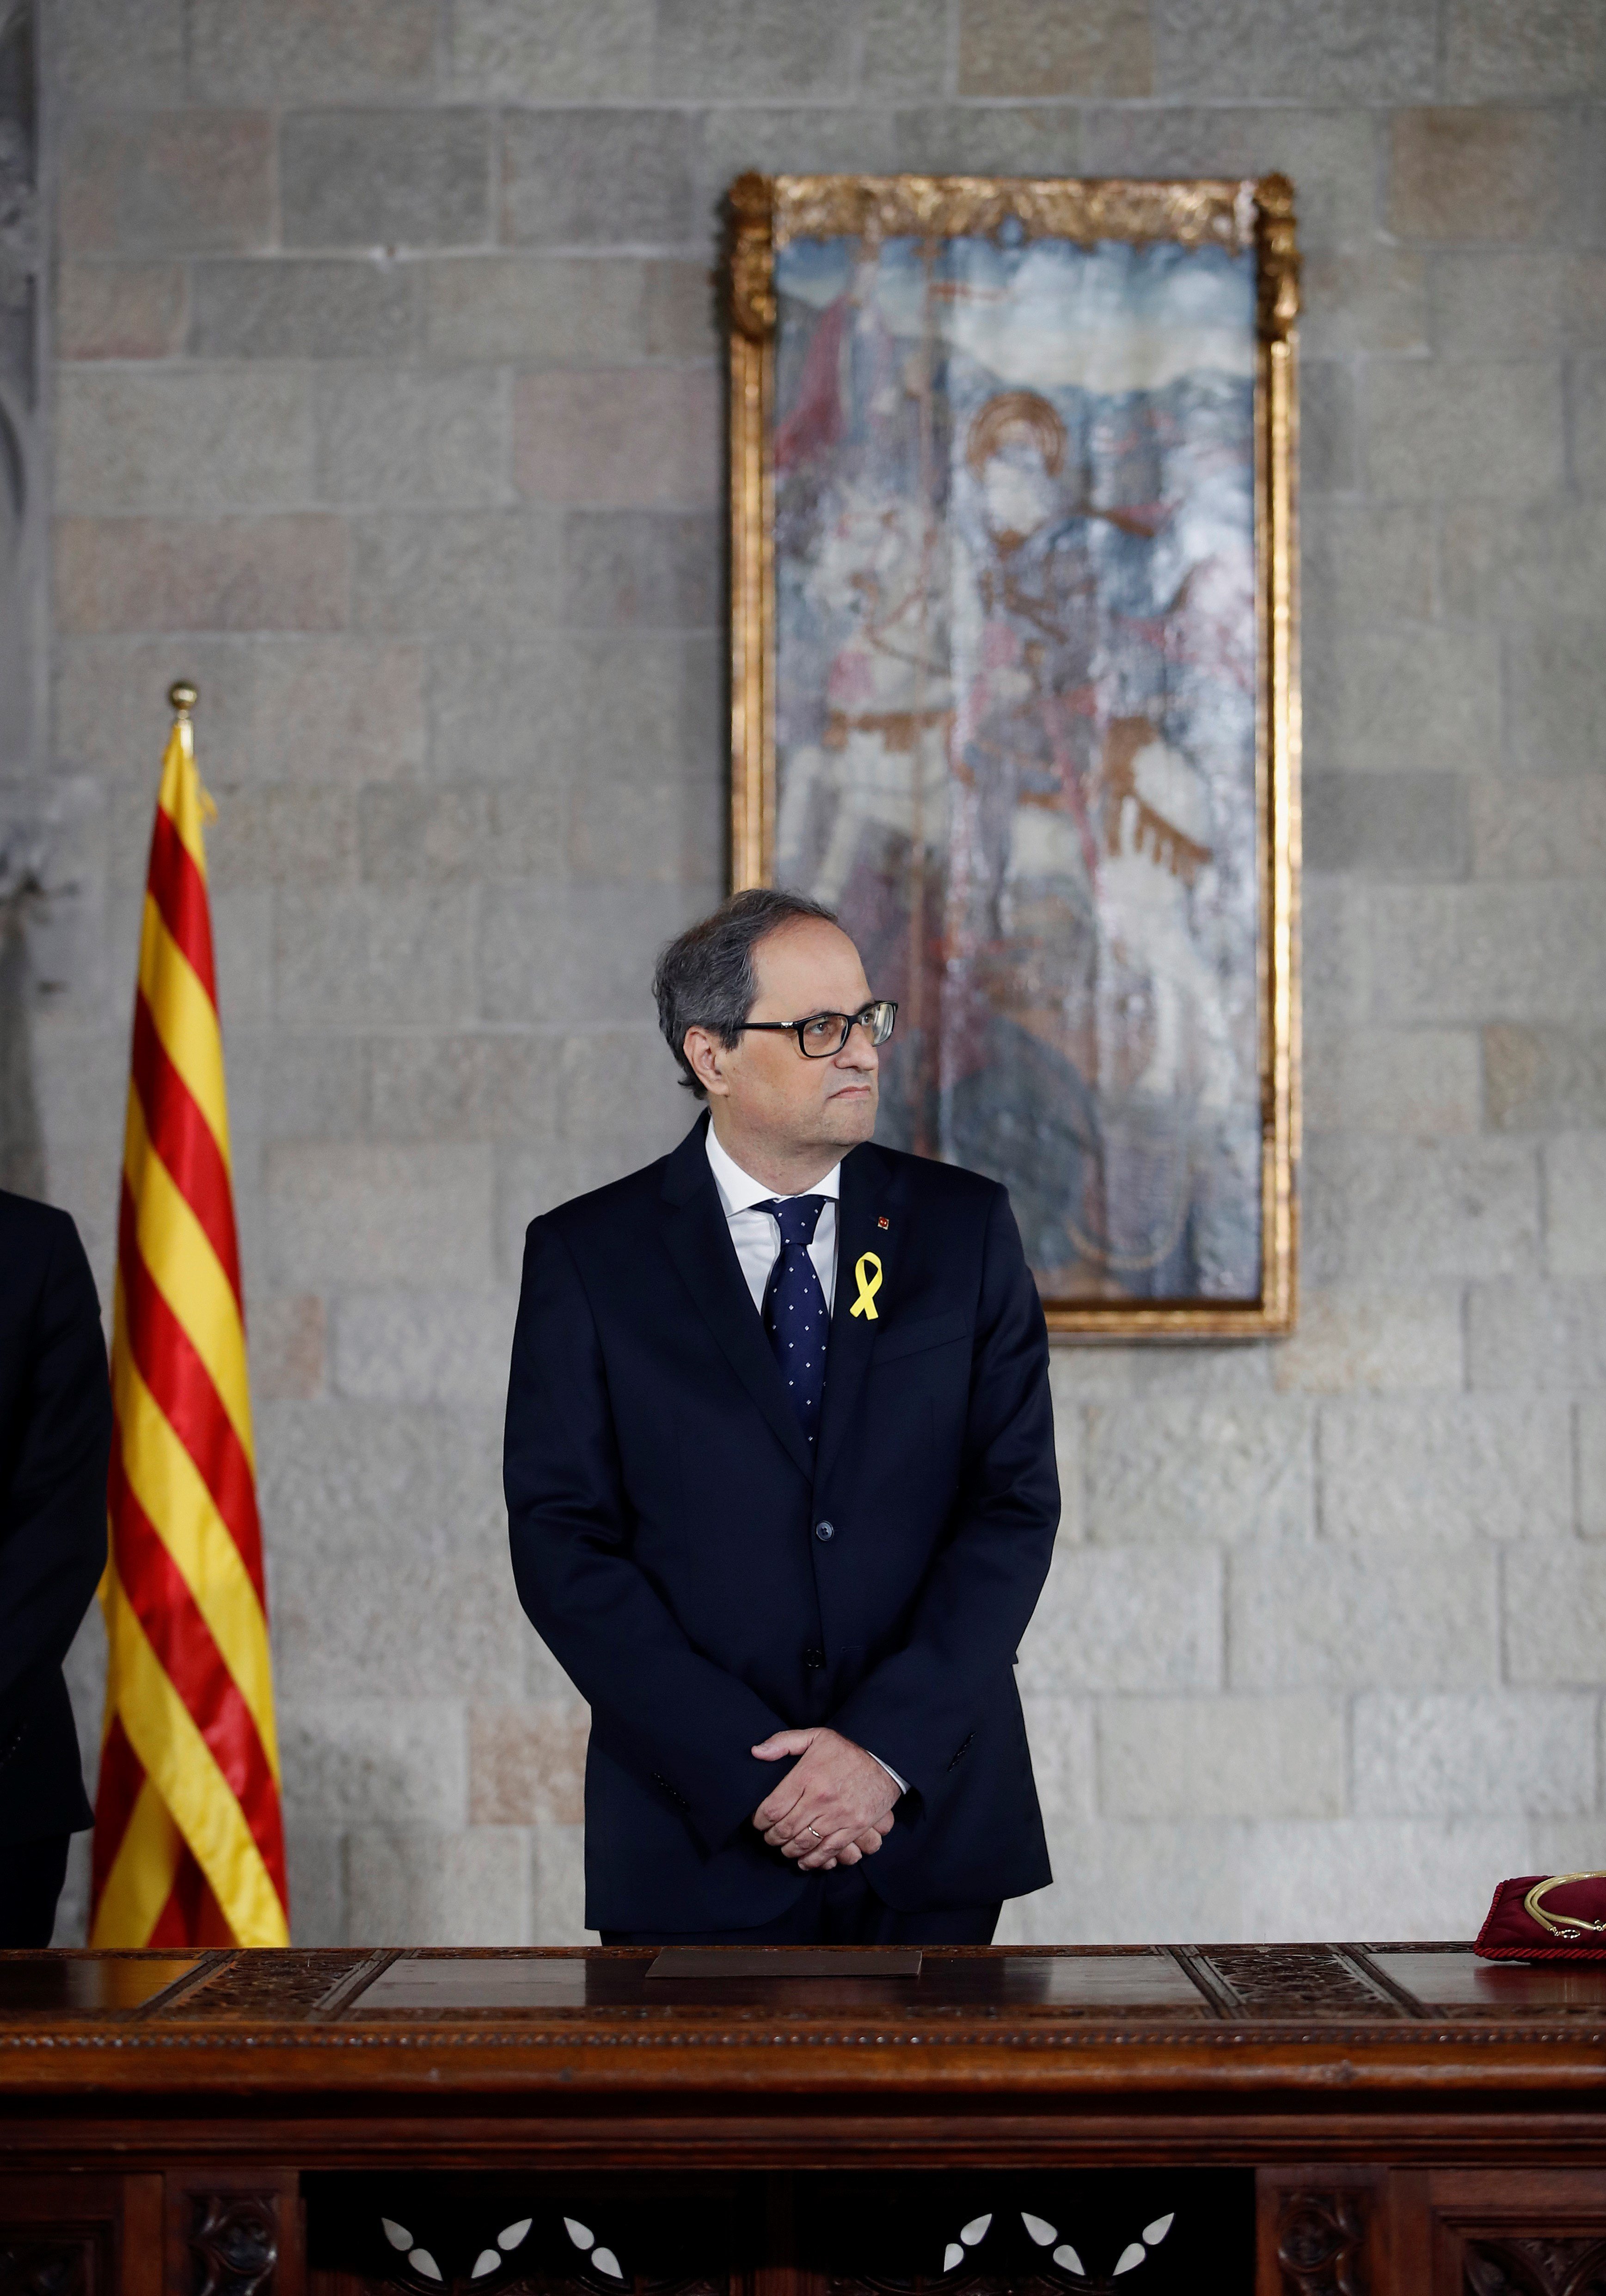 President Quim Torra's letter to Rajoy asking for a meeting "with no conditions"